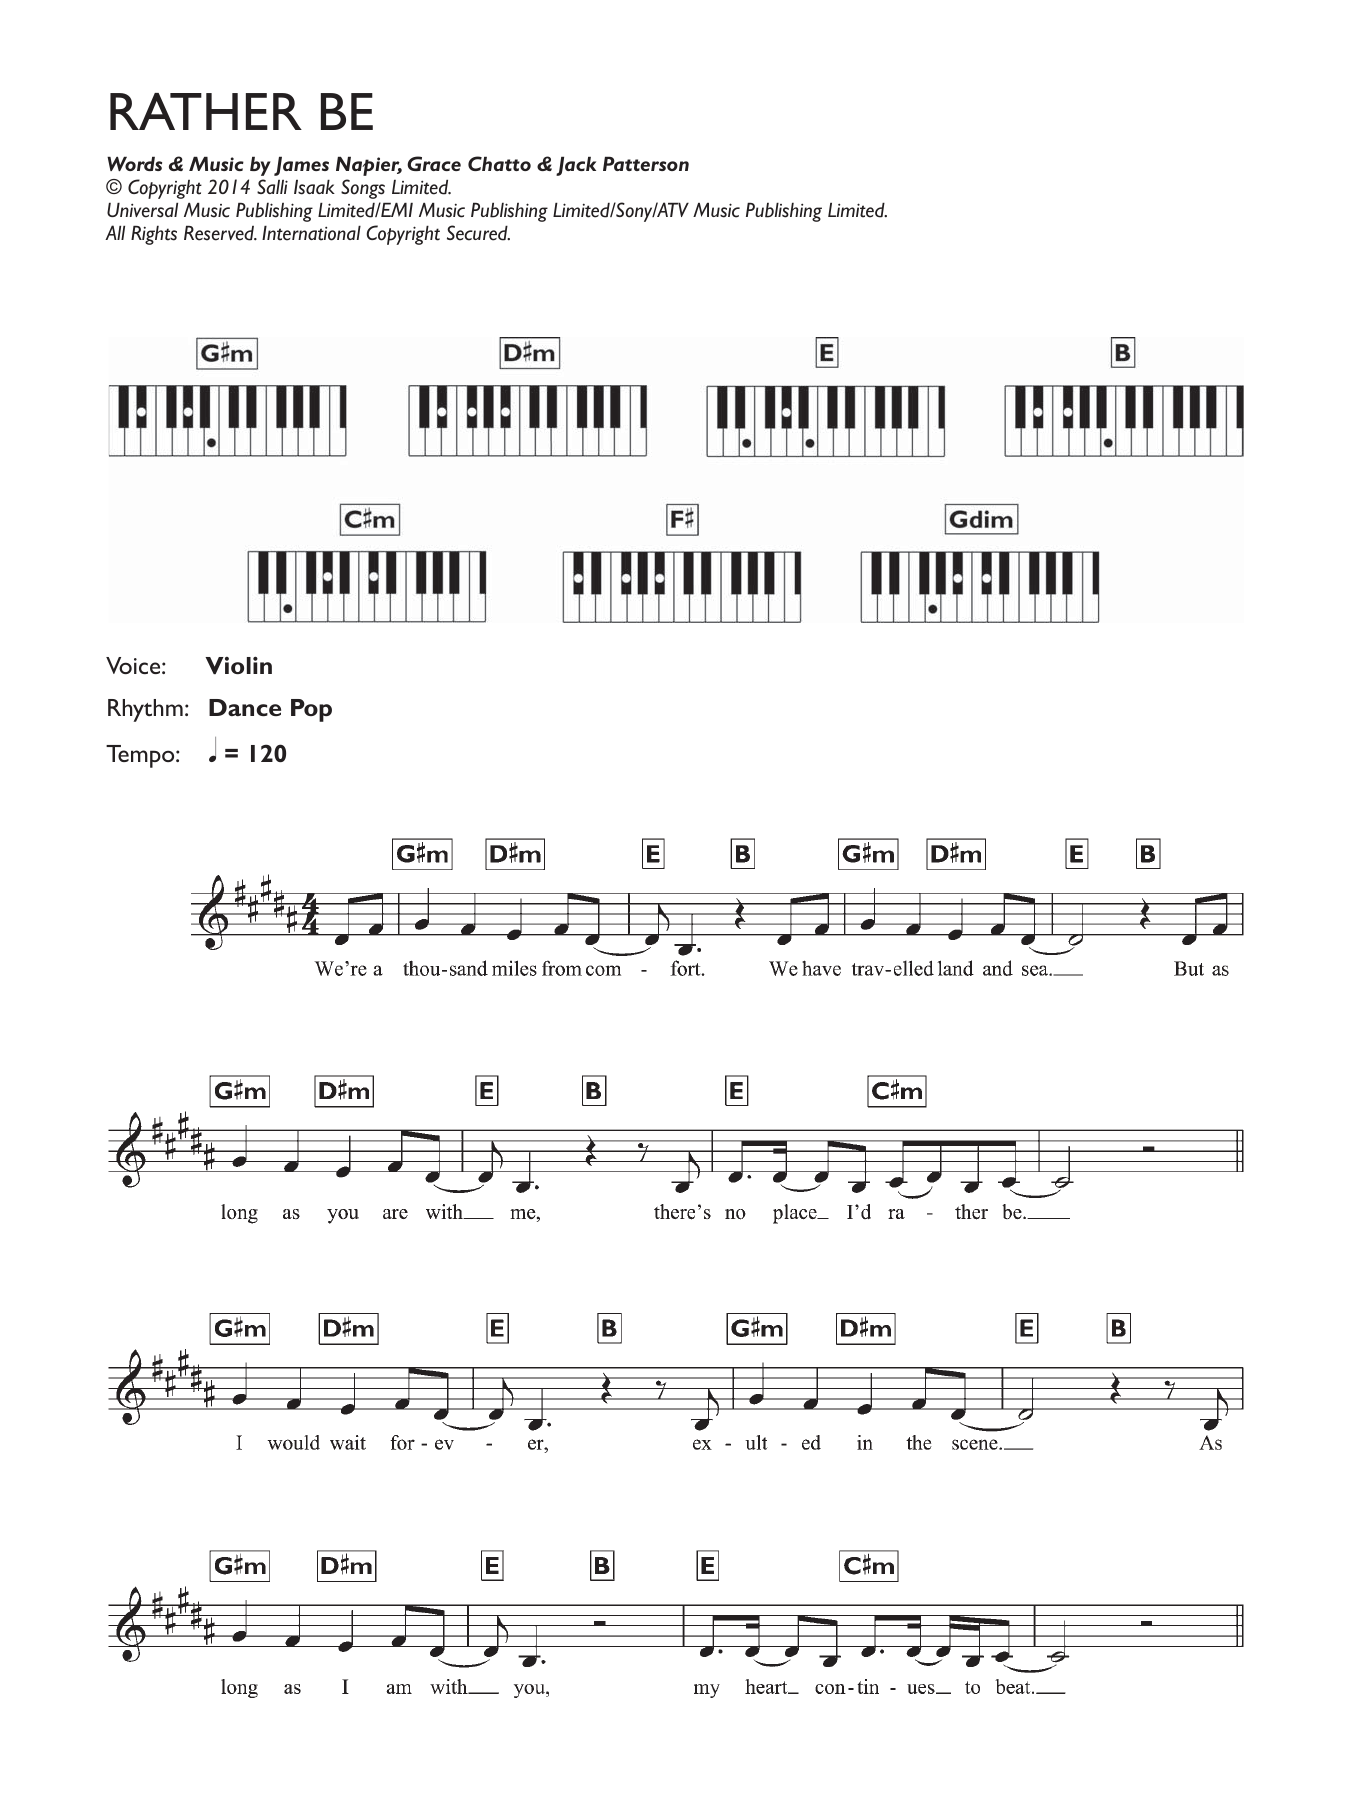 Download Clean Bandit Rather Be (featuring Jess Glynne) Sheet Music